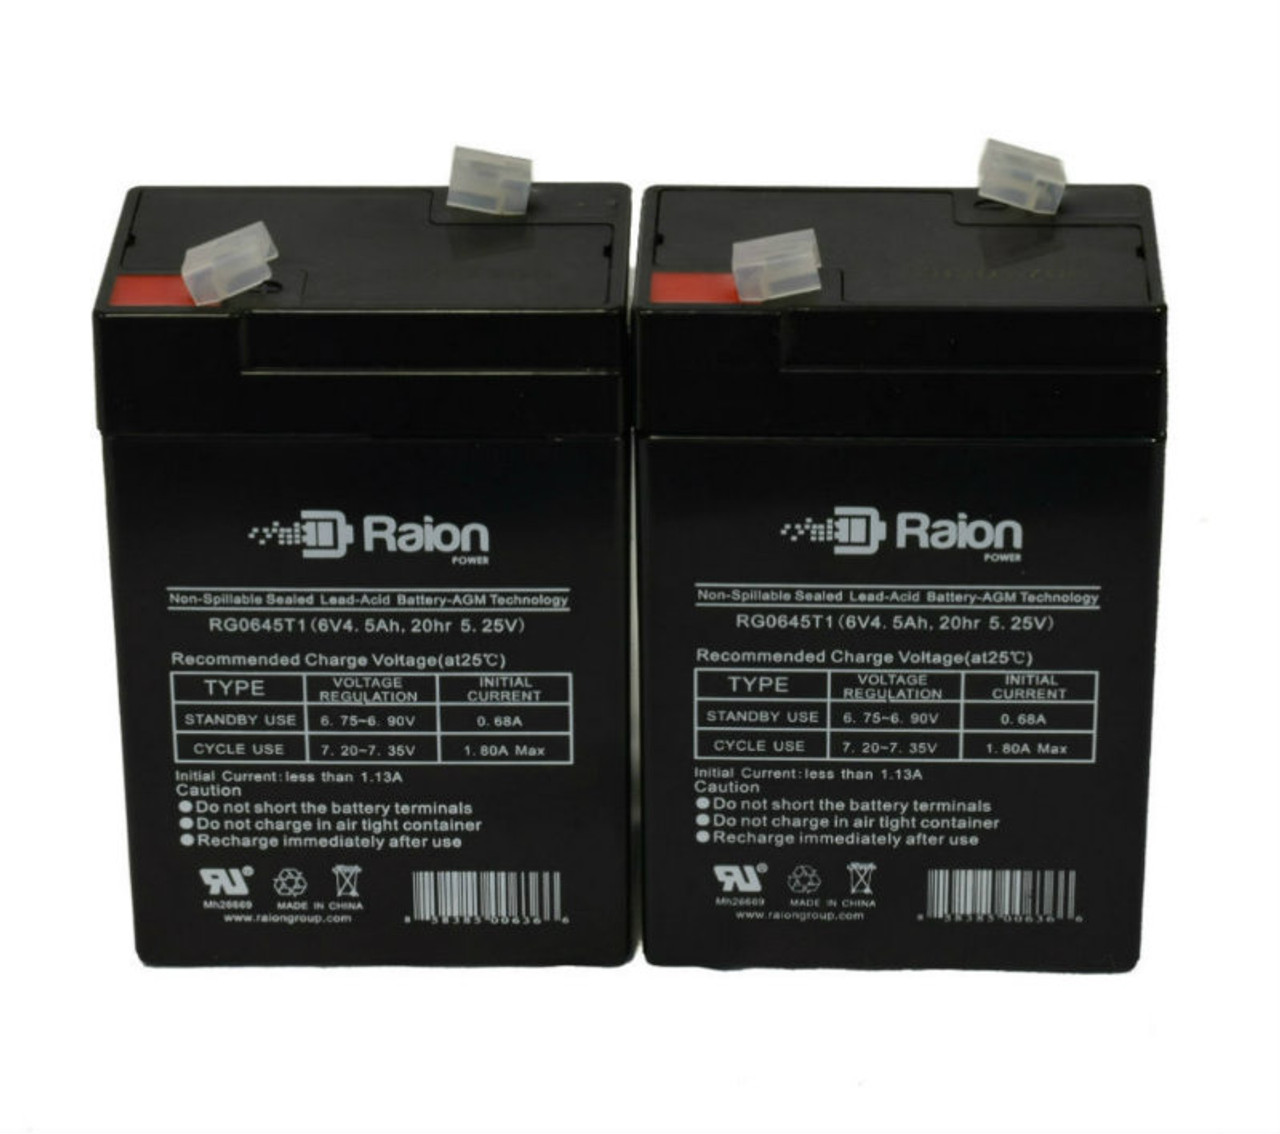 Raion Power 6V 4.5Ah Replacement Emergency Light Battery for Dual-Lite 0120800 Battery - 2 Pack